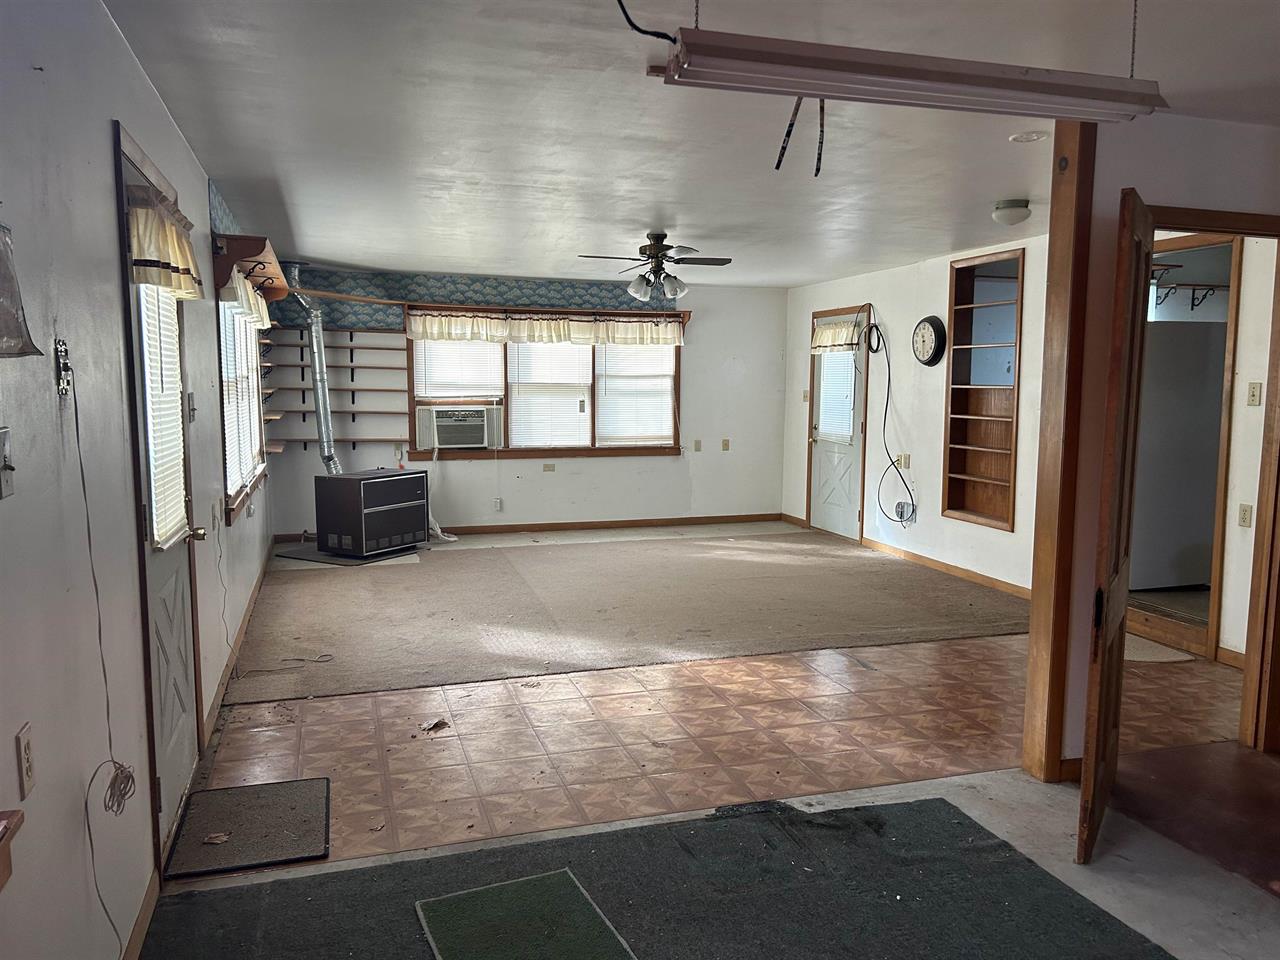 For Sale: 112 S Topeka St, Haven KS